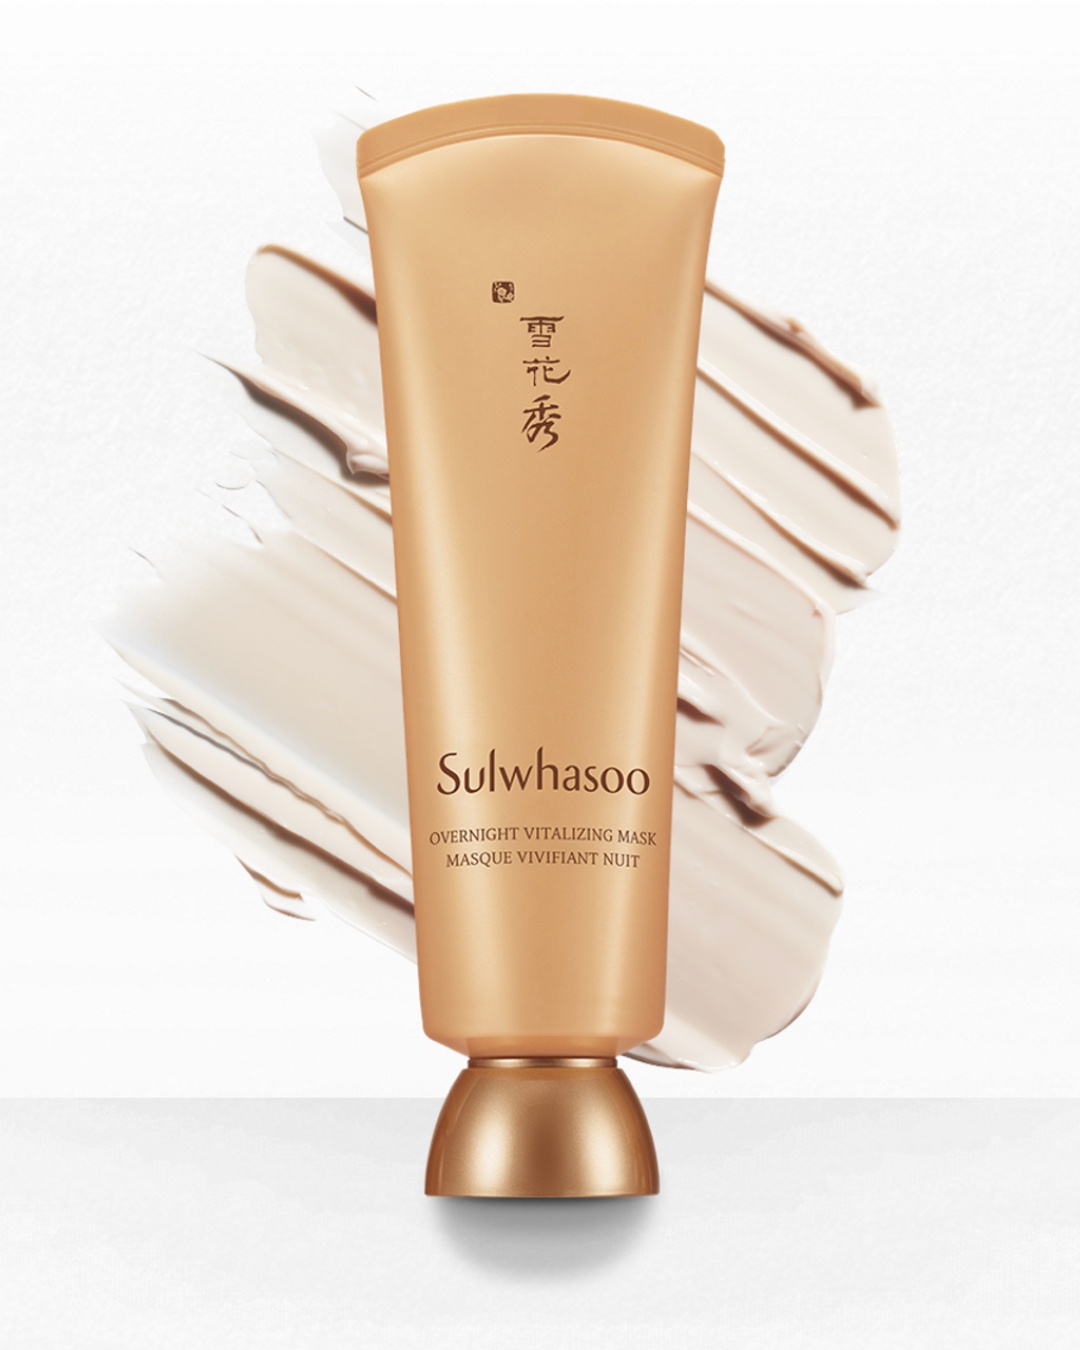 An overnight mask from Sulwhasoo.